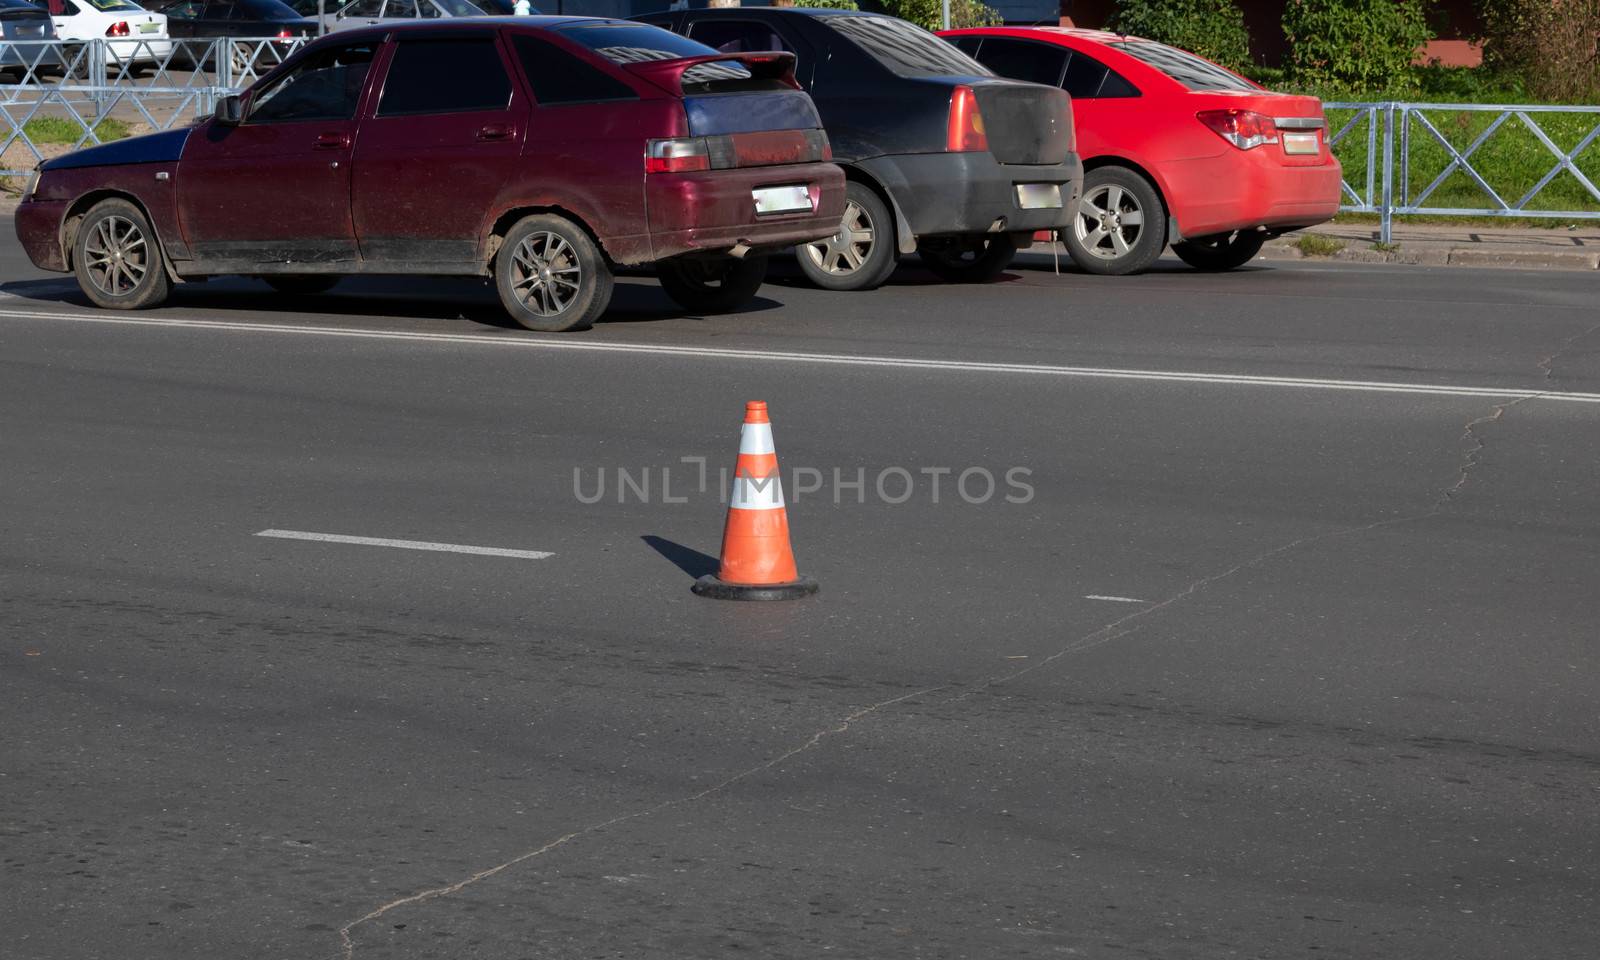 an orange traffic cone on the road indicates the path, road works, detour of a dangerous section of road, roadway repairs.